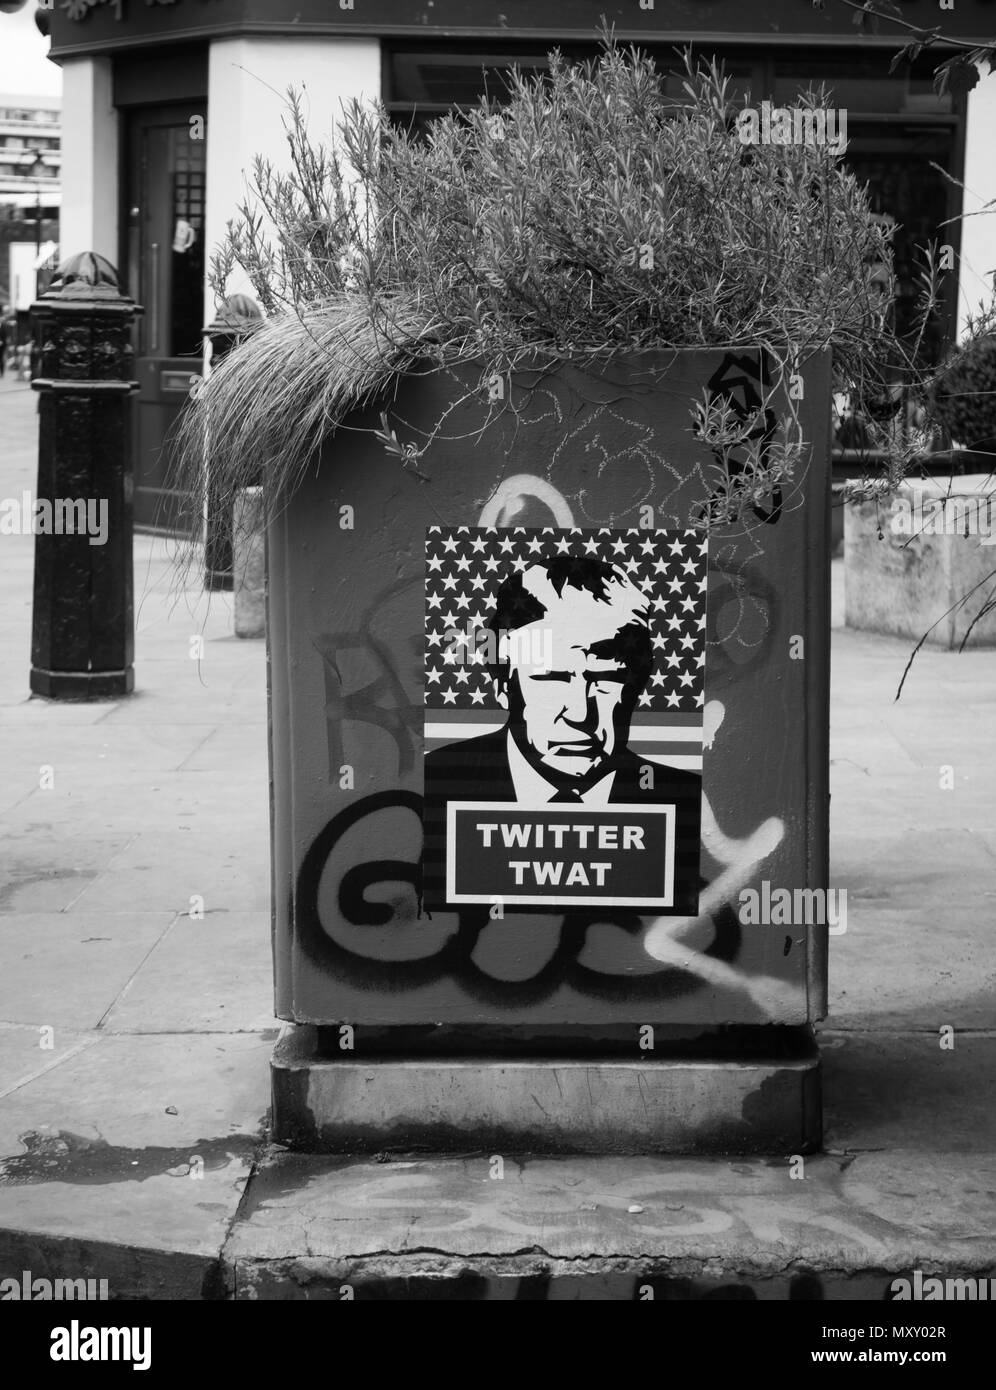 Poster of an satirical image looking like Donald Trump reading 'twitter twat' seen on a London street planter Stock Photo